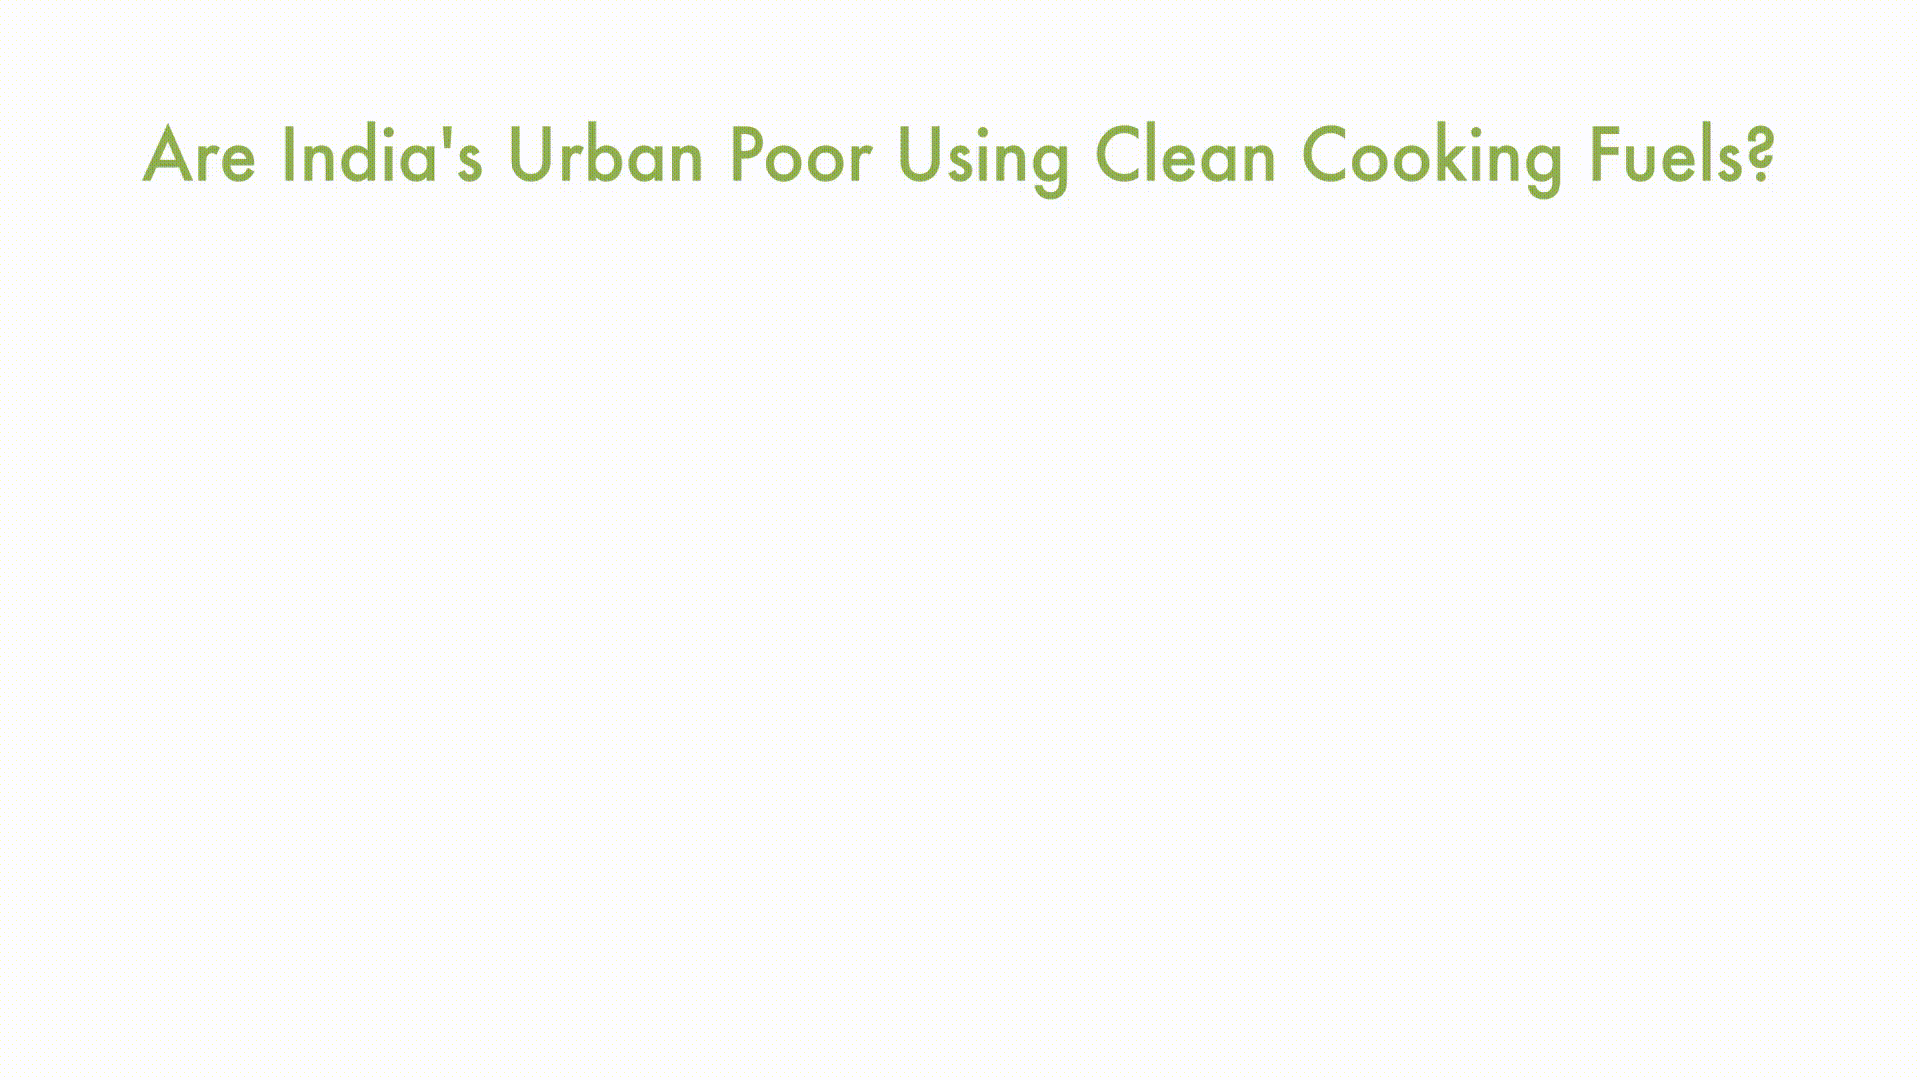 To reduce the health impacts from HAP, households who are stacking with polluting fuels would need to transition to exclusive use of clean cooking fuels